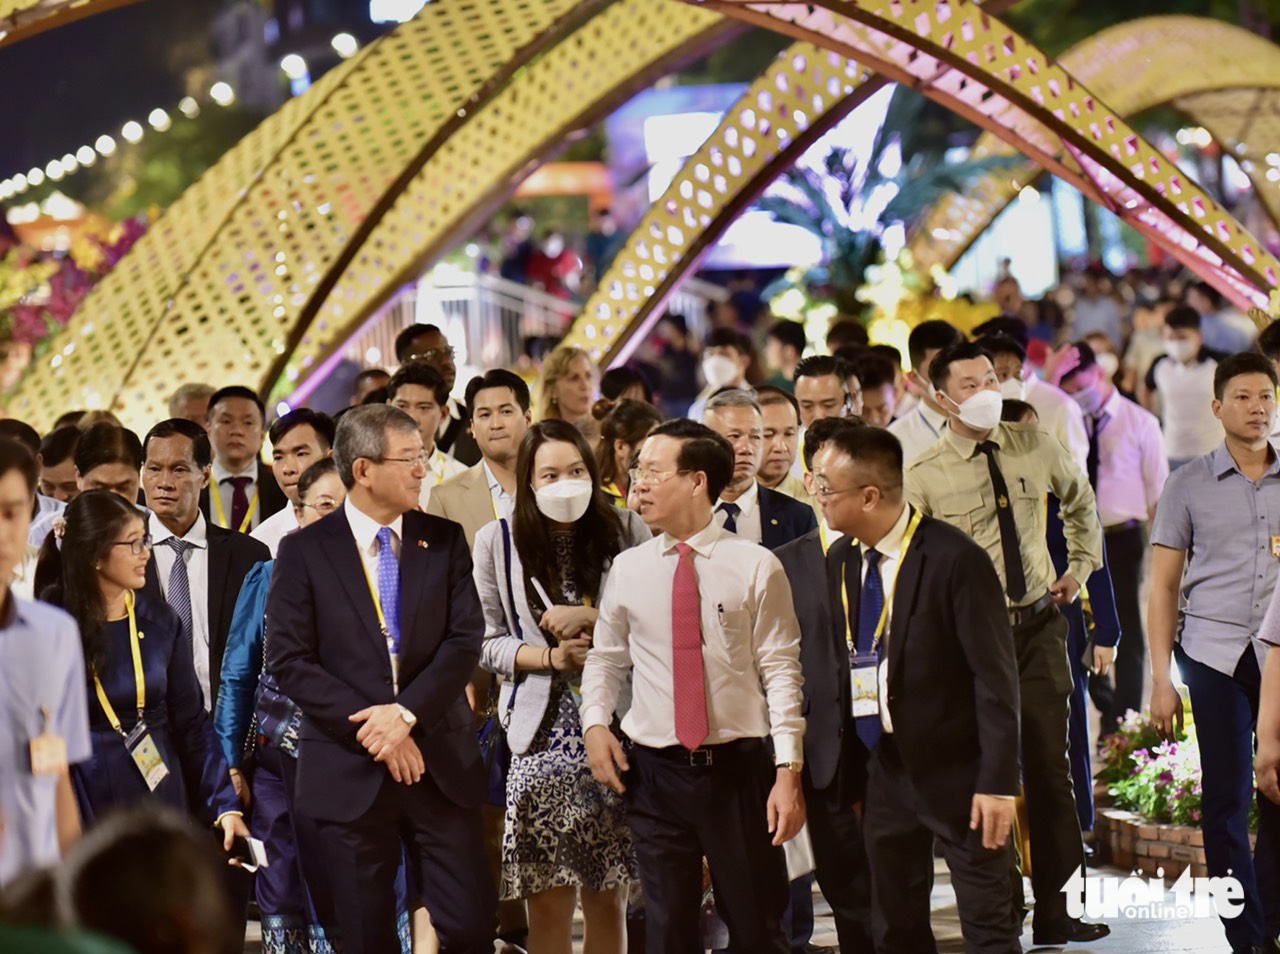 Delegates visit the flower street after attending the flower street opening ceremony. Photo: T.T.D. / Tuoi Tre